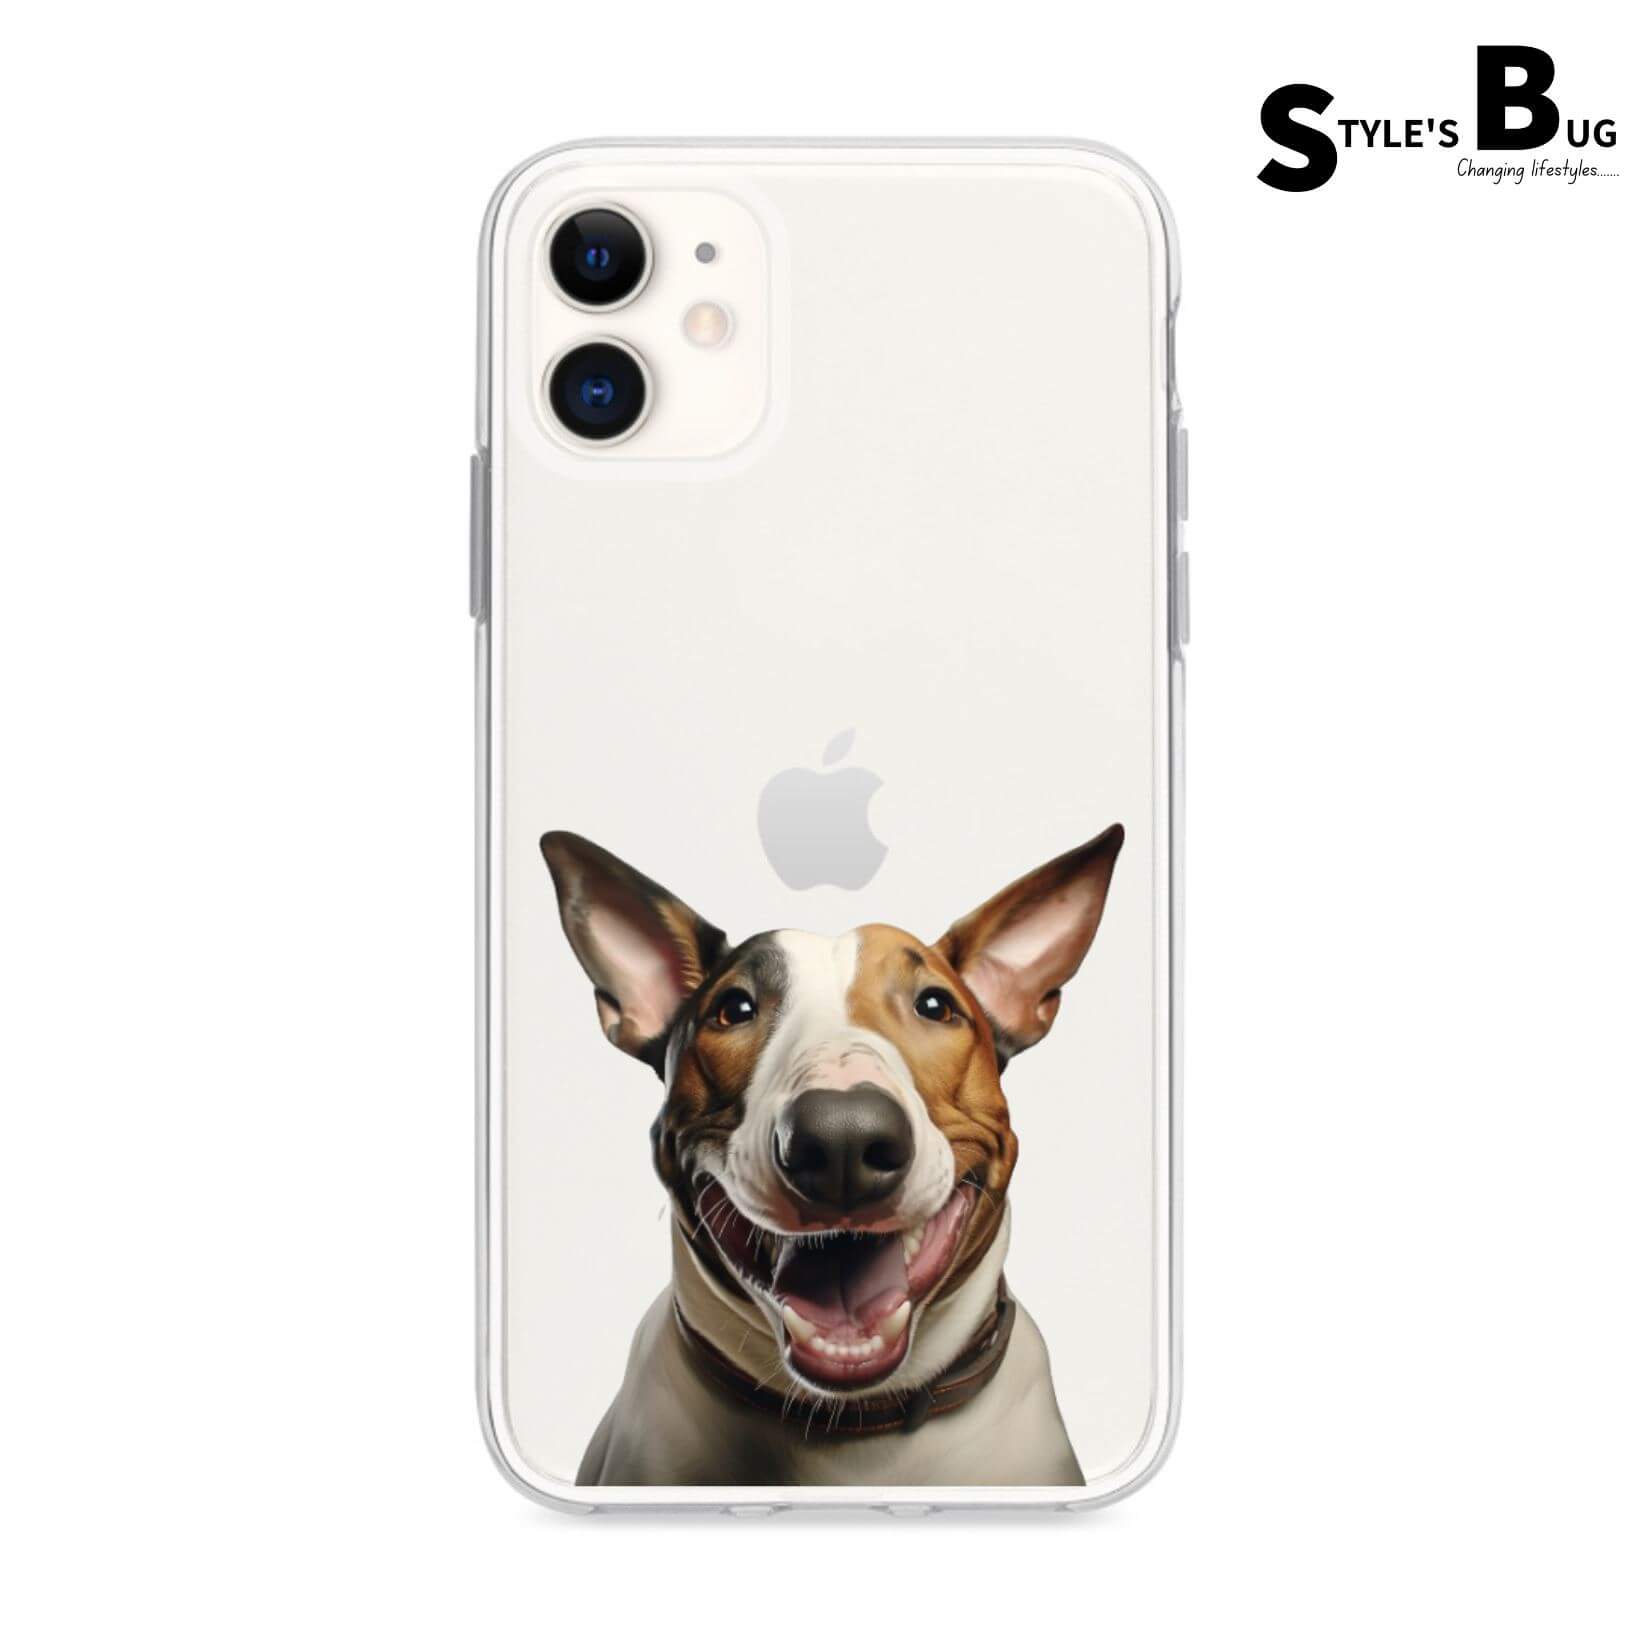 Smiling Dog phone cases from Style's Bug (UV printed) - Style's Bug Bull Terrier